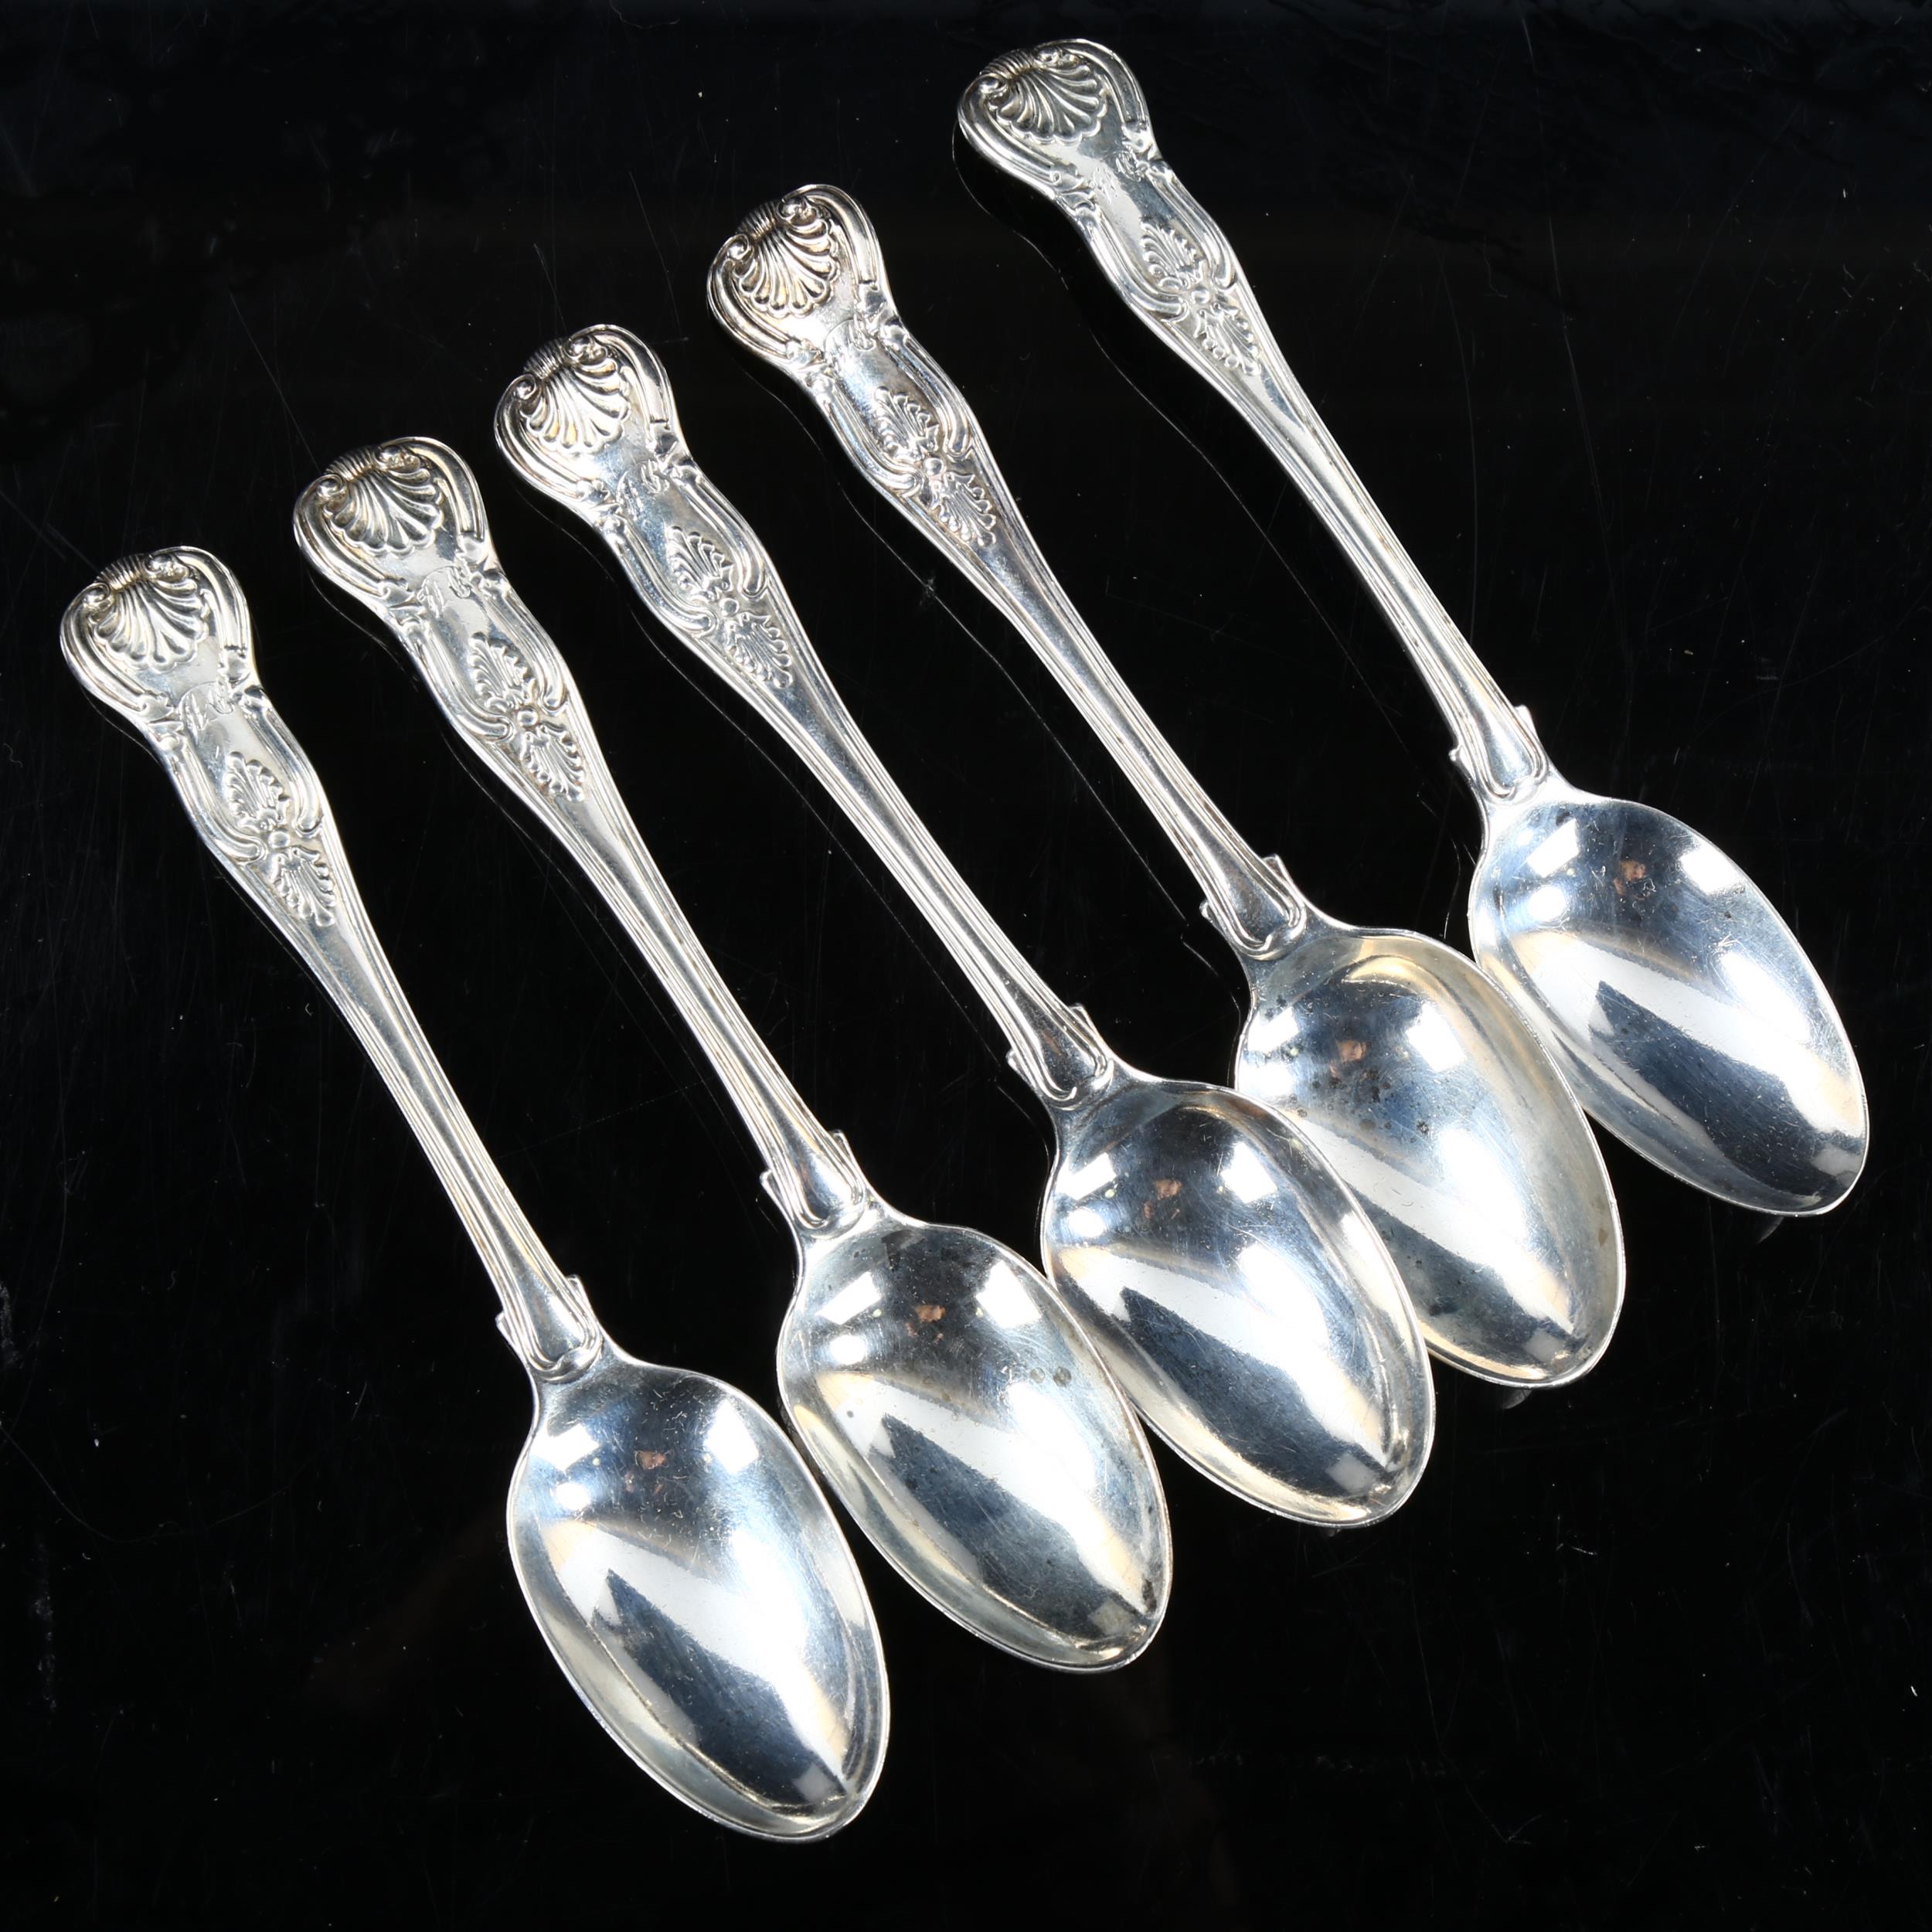 A set of 5 William IV silver King's pattern teaspoons, by Mary Chawner, hallmarks London 1834,